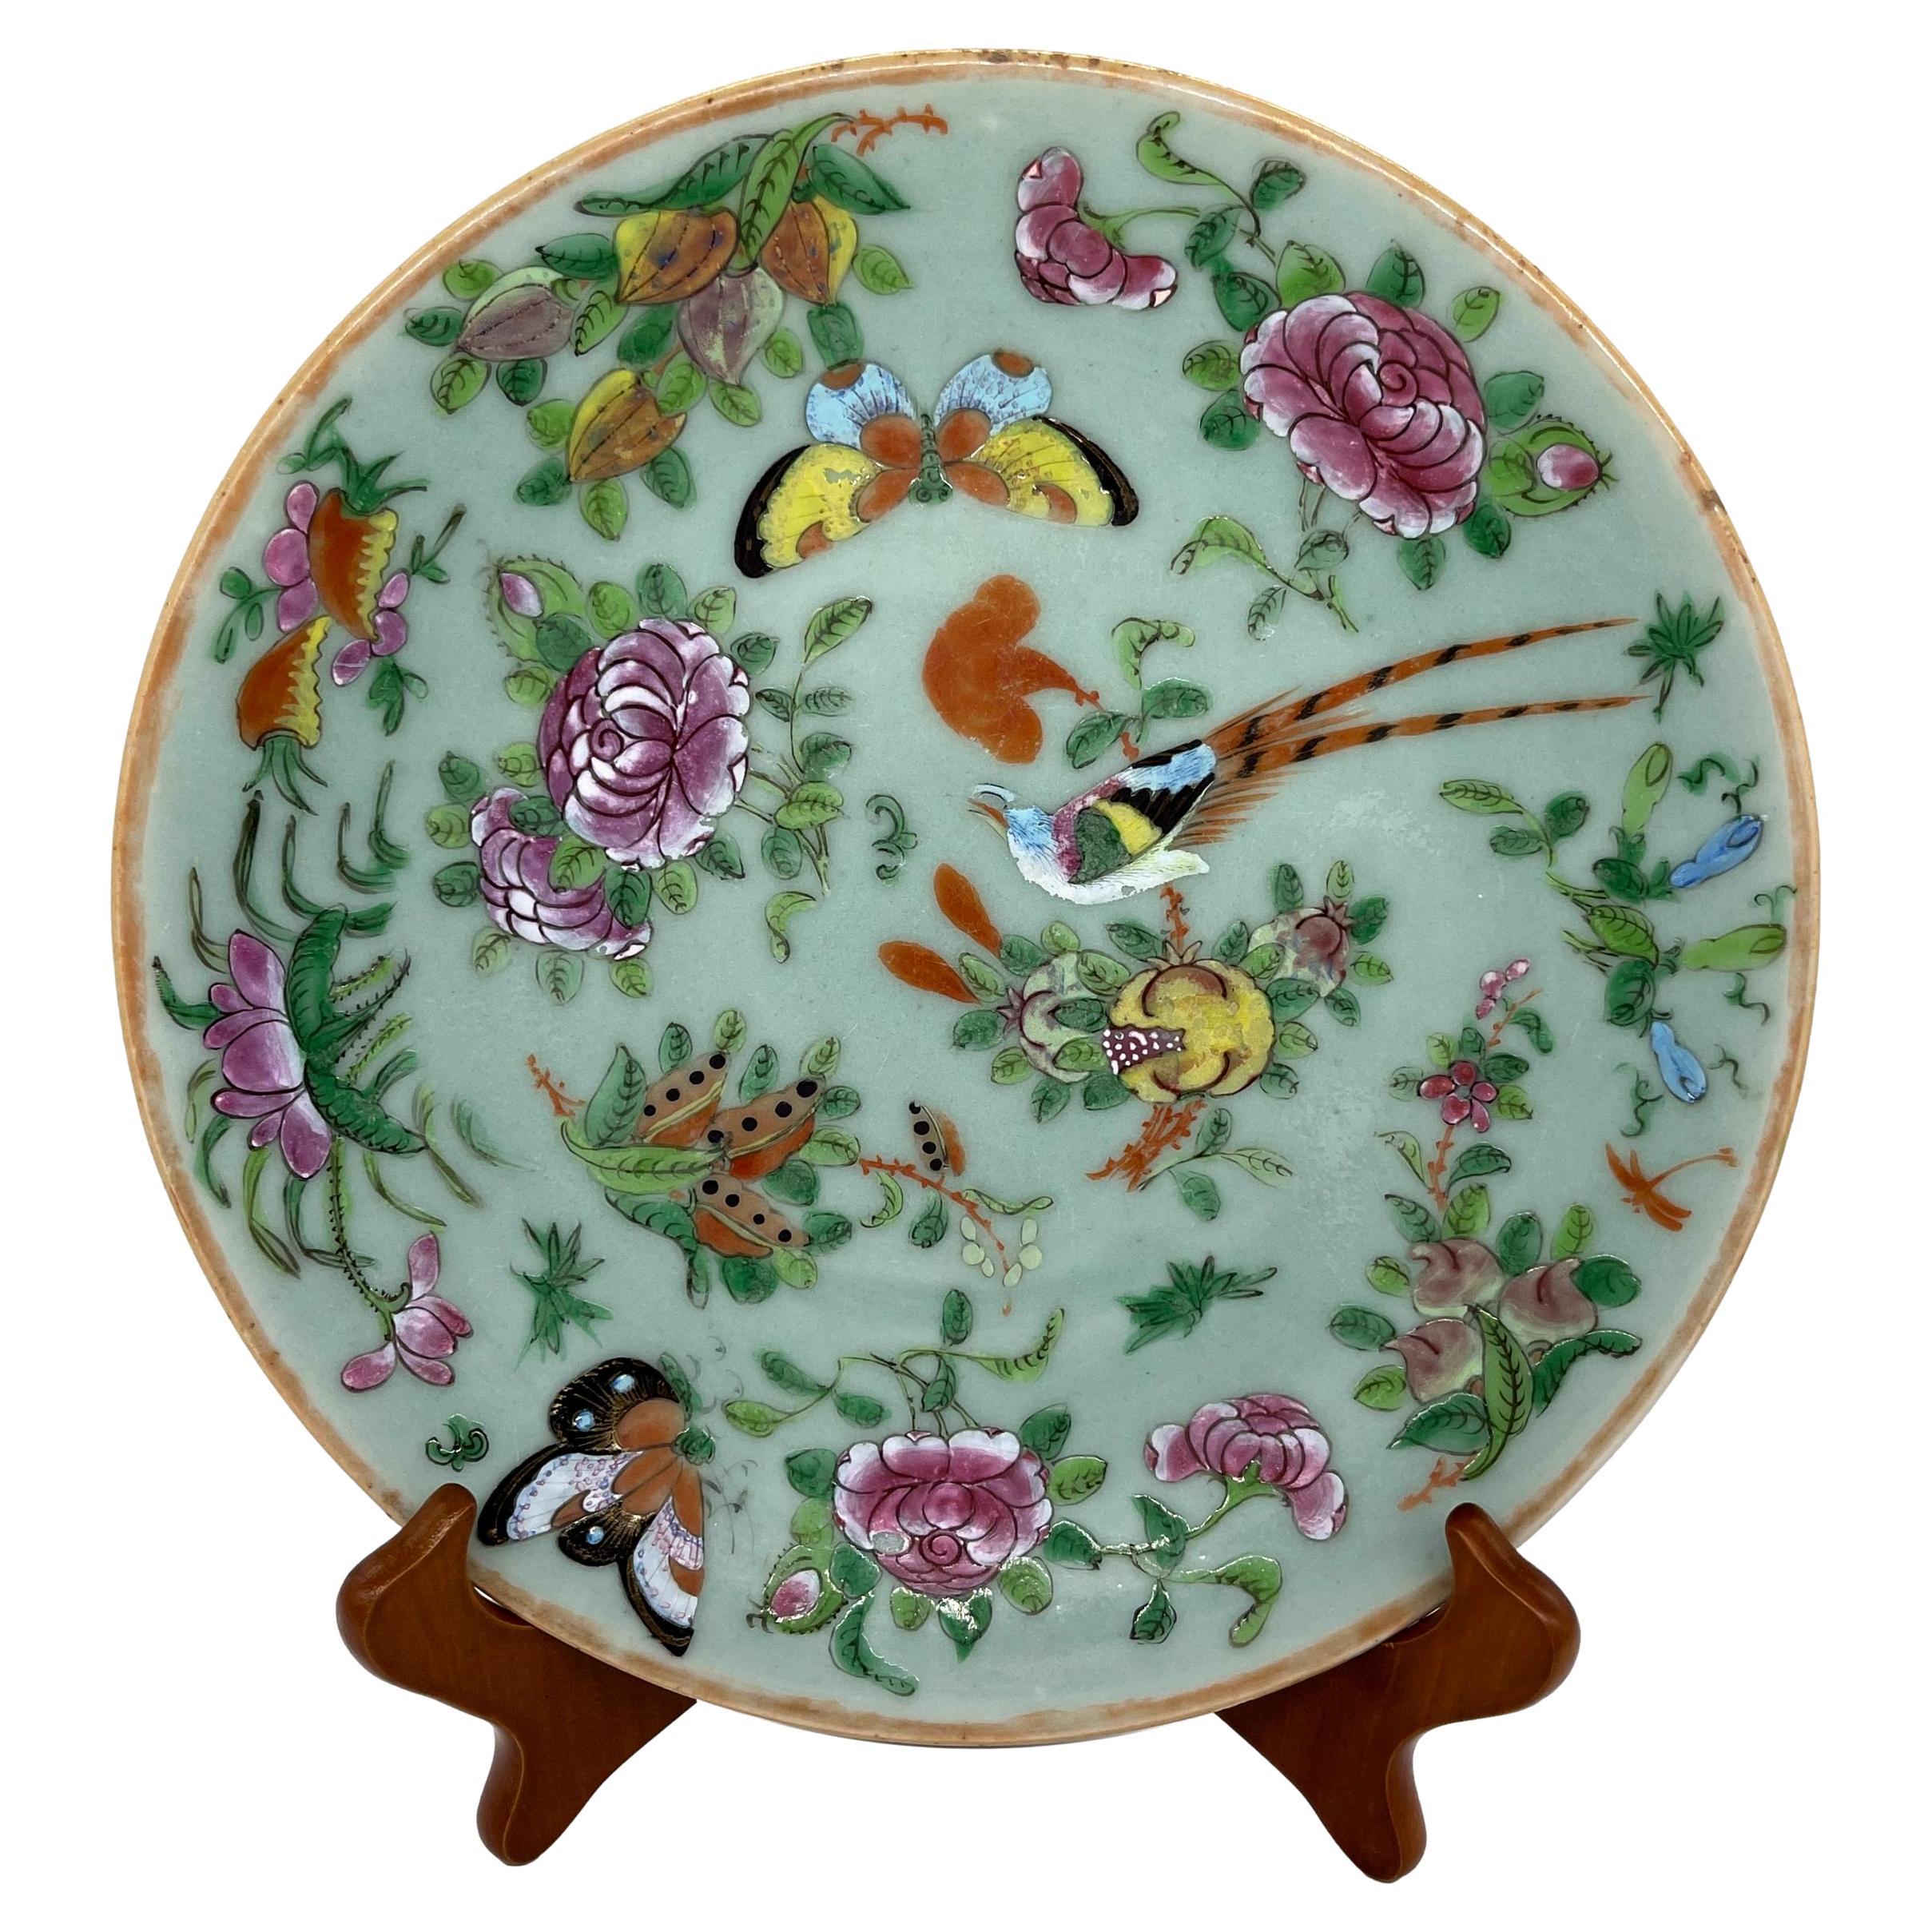 Canton Famille Rose Chinese Export Porcelain Celadon-Ground 10-In Plate